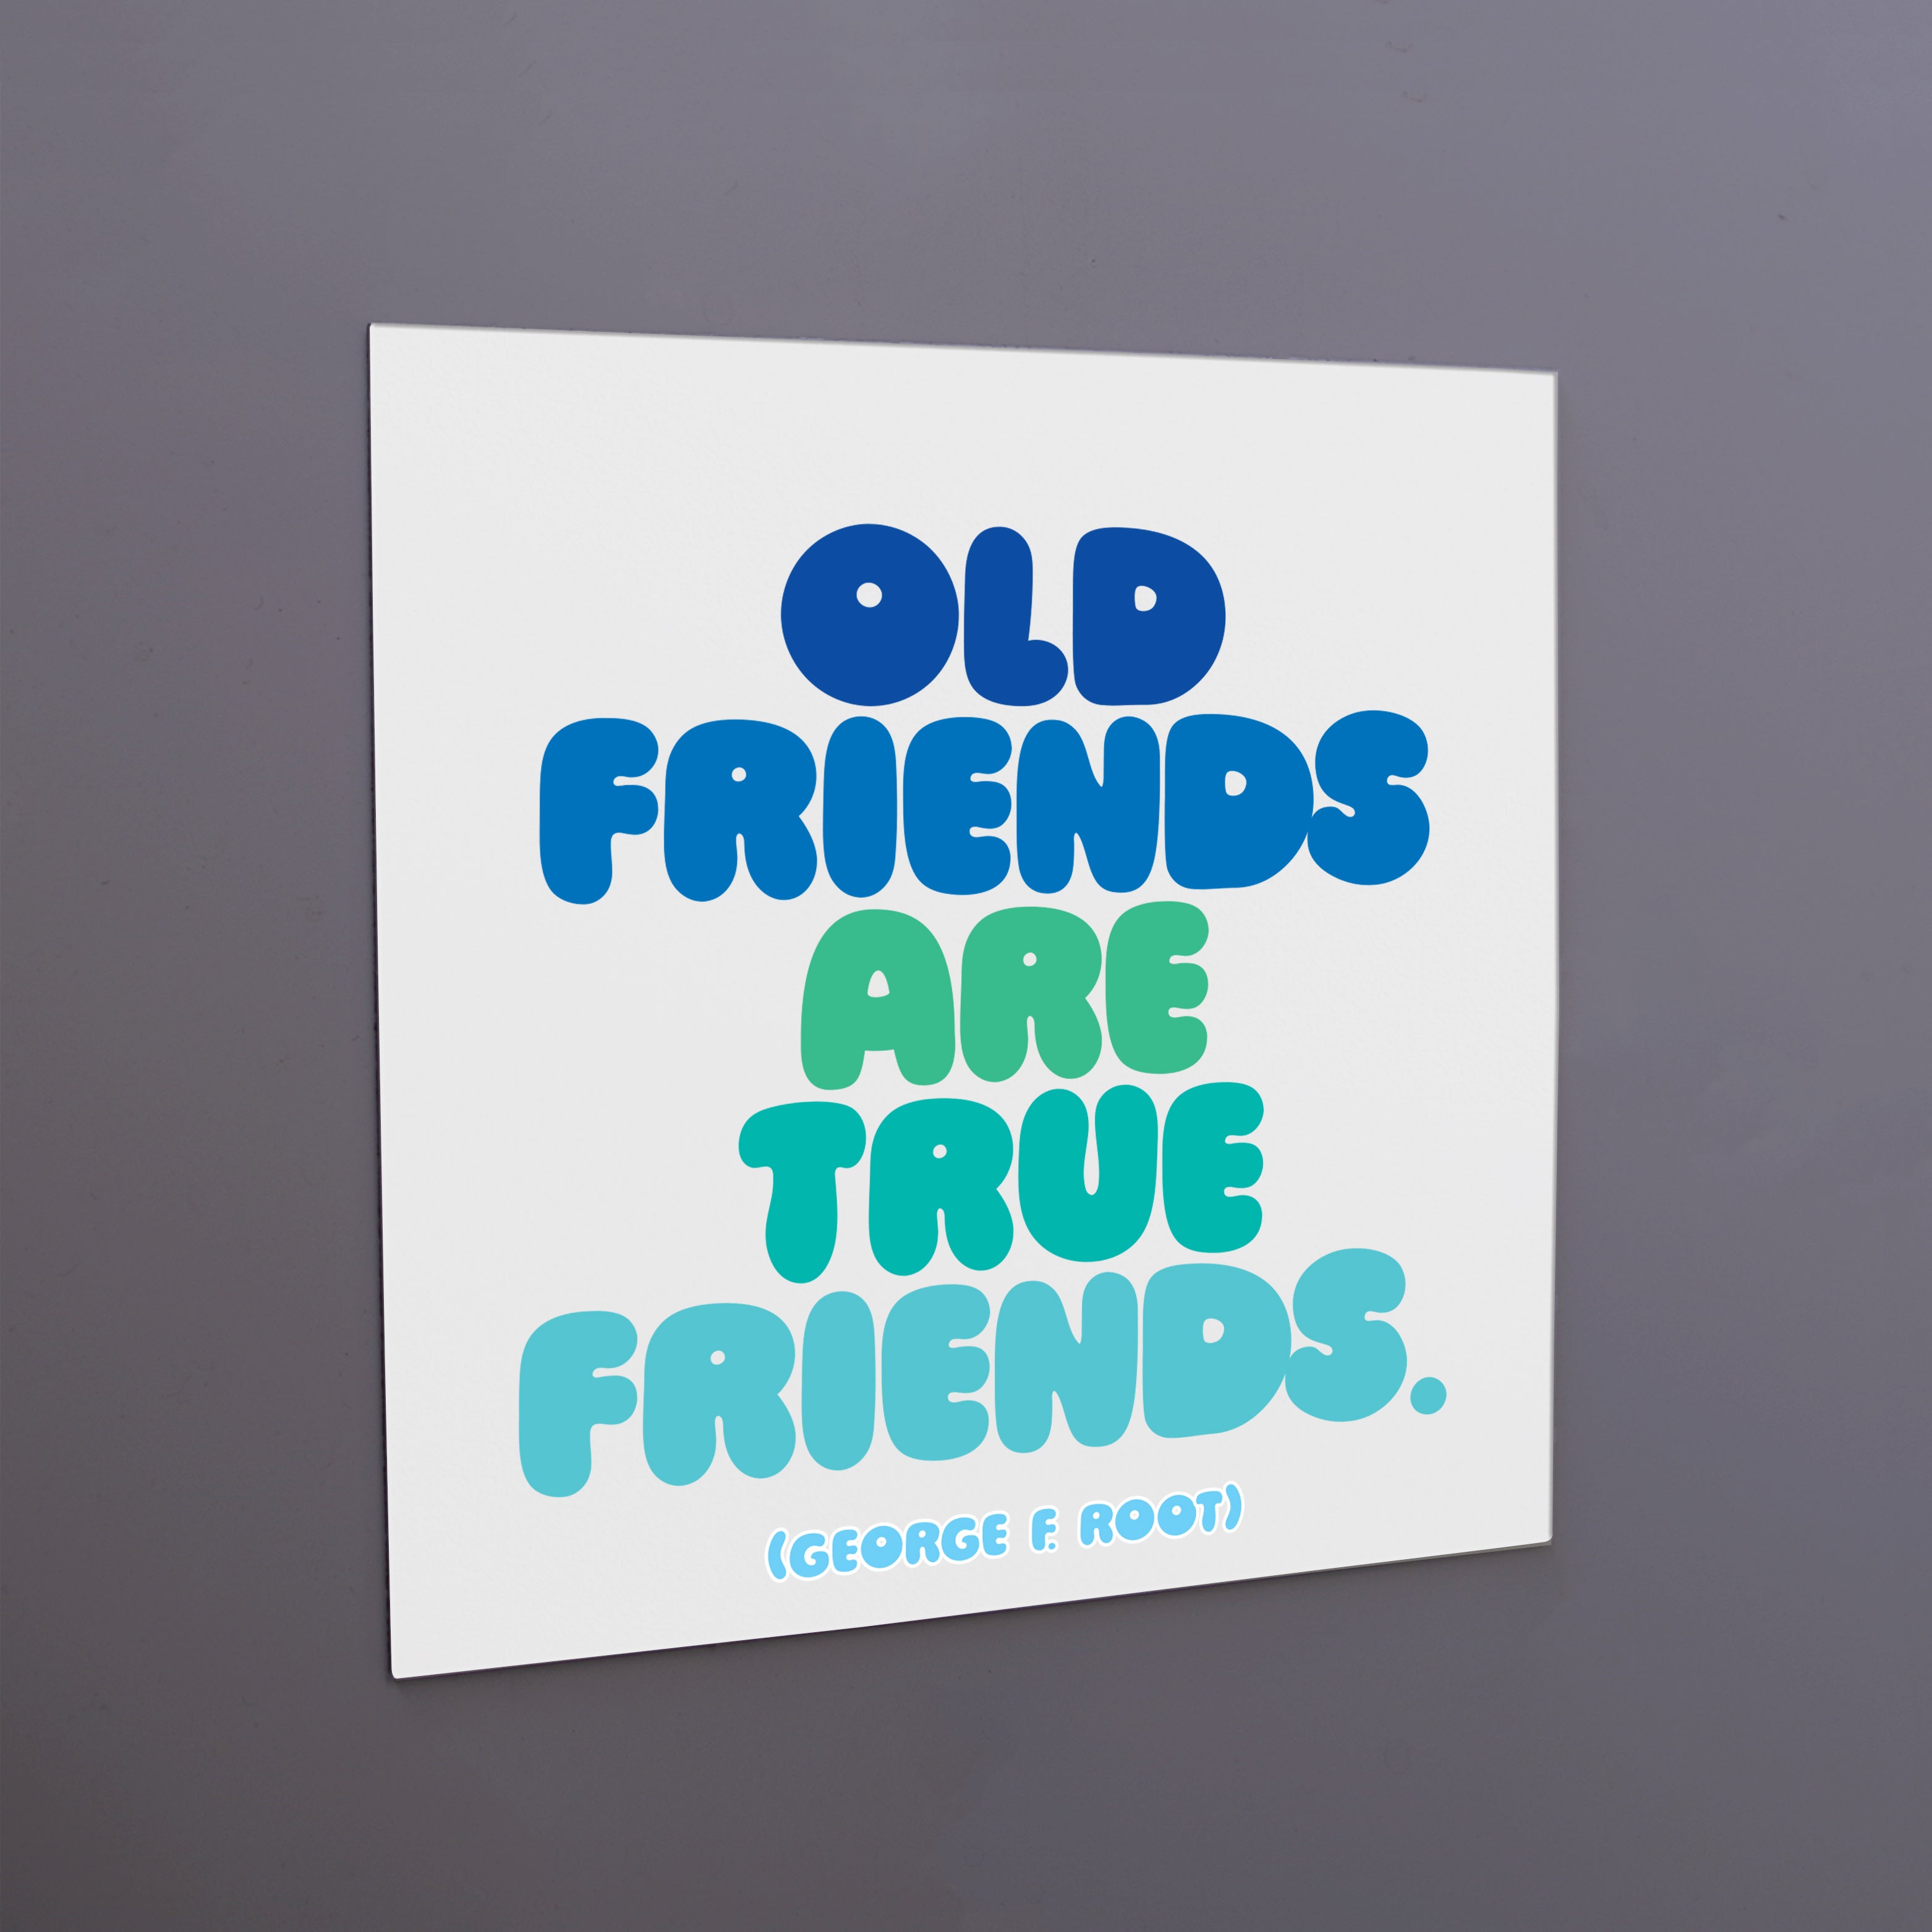 "old friends are true friends" magnet